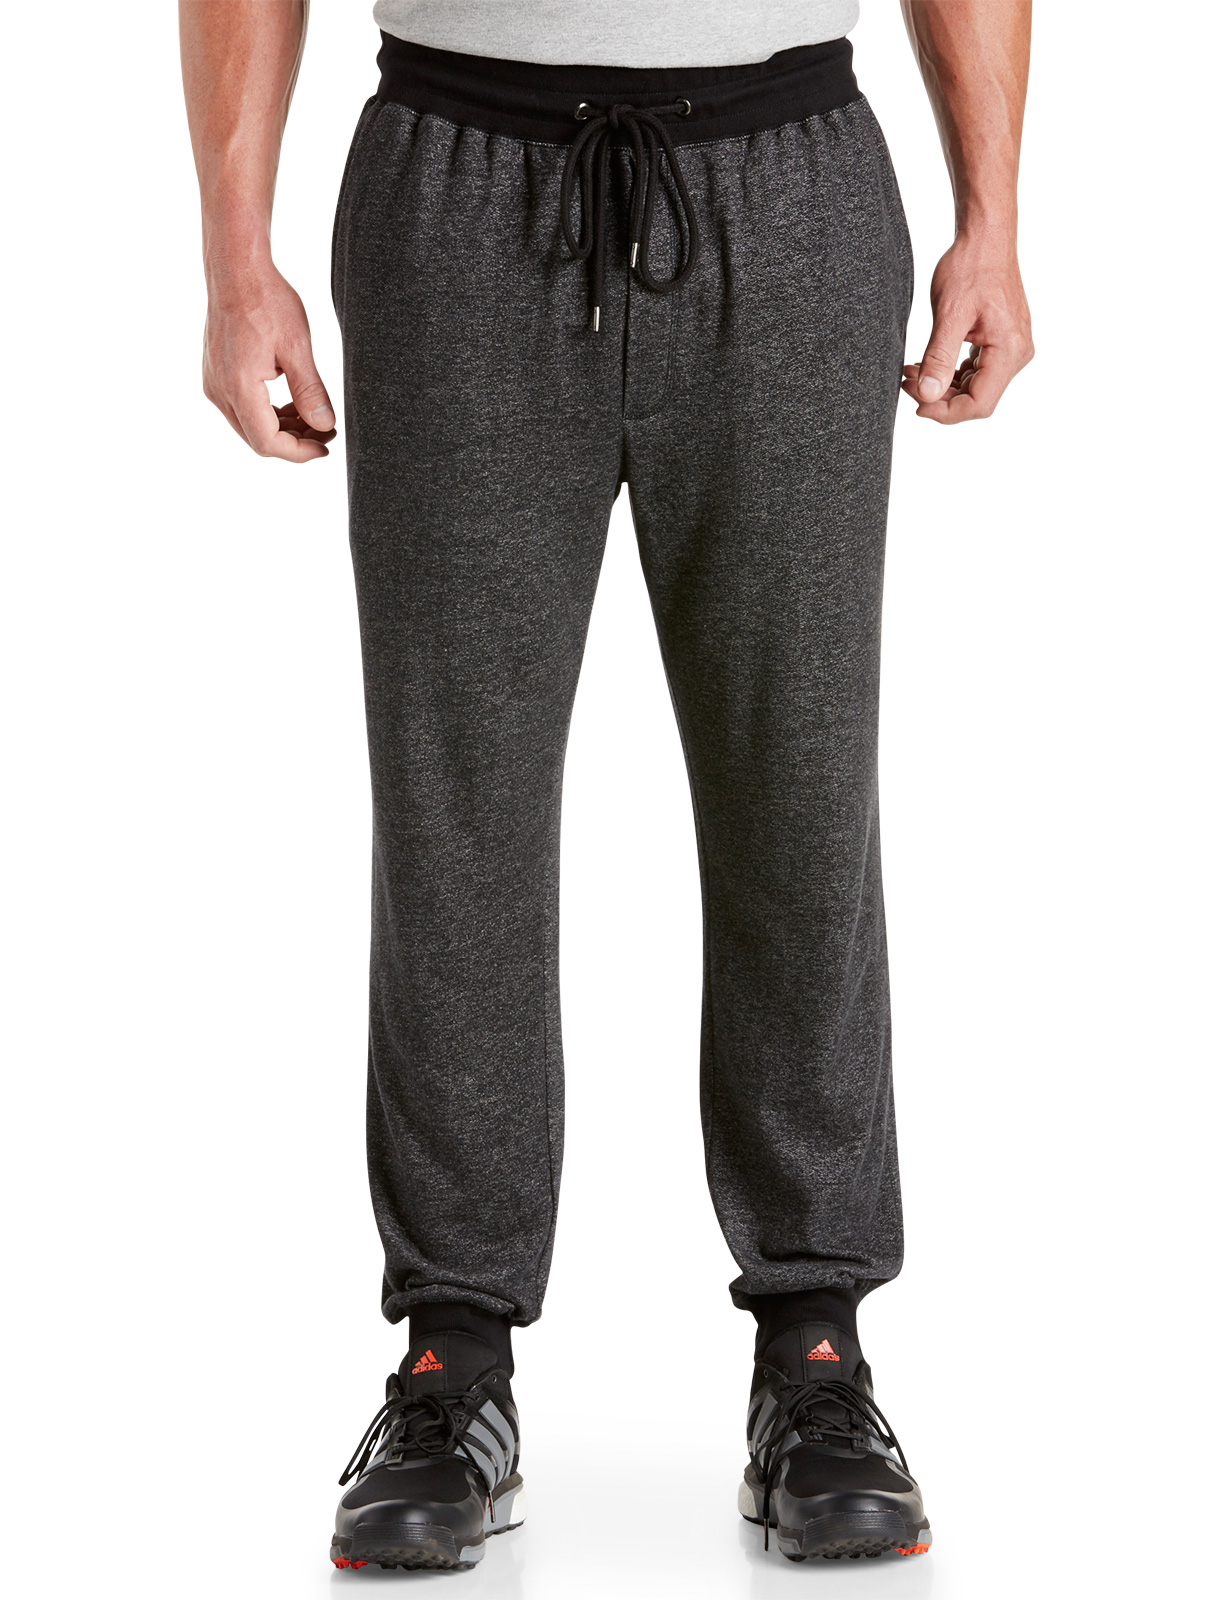 Society of One Men's Big and Tall Knit Joggers